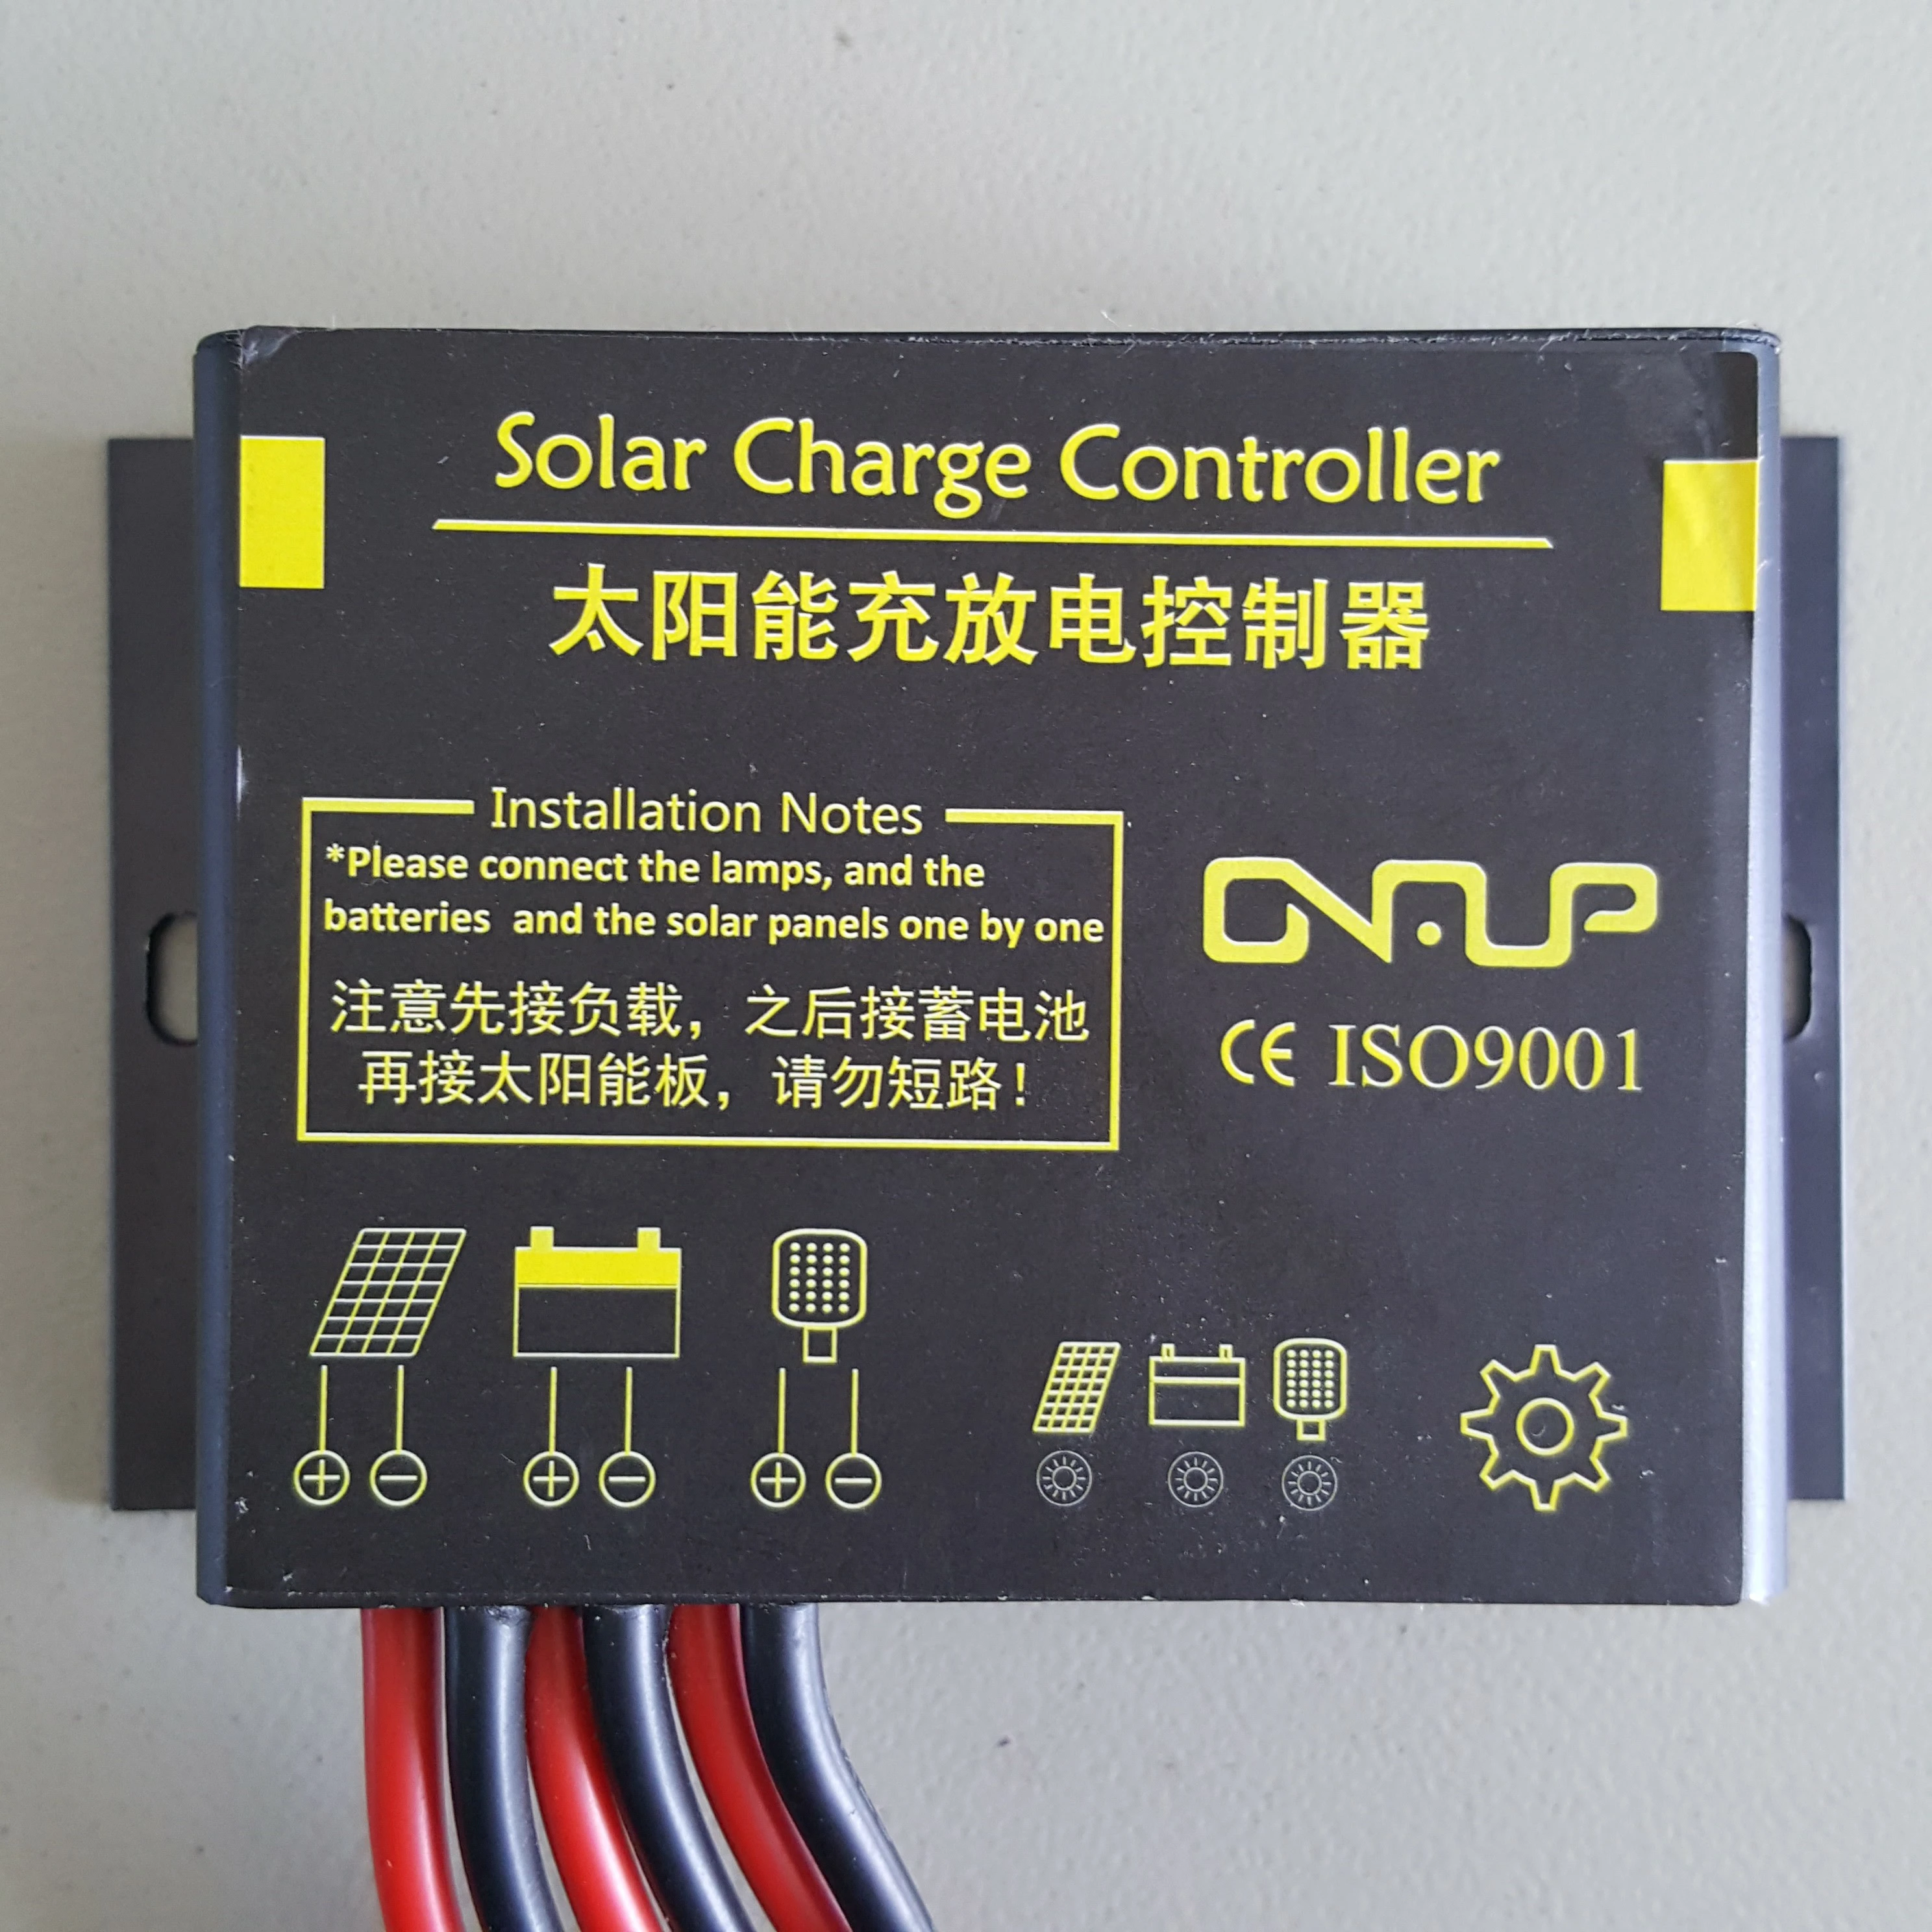 Solar Charge Controller Wireless Road Traffic Light Manufacturer